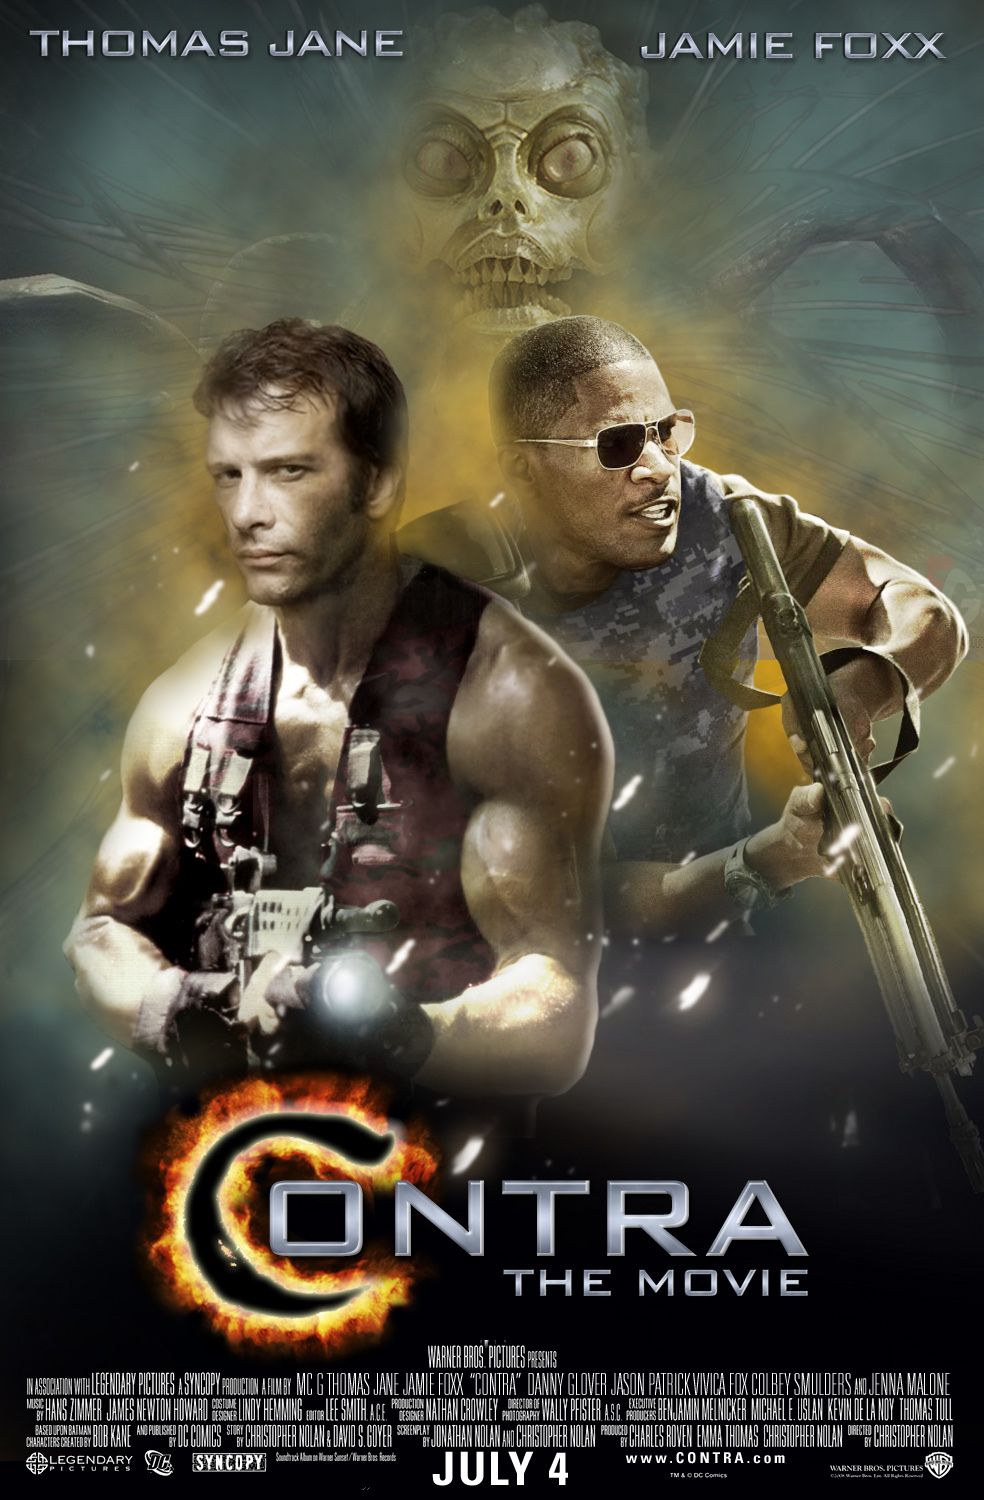 Contra Image Super HD Wallpaper And Background Photos 3d